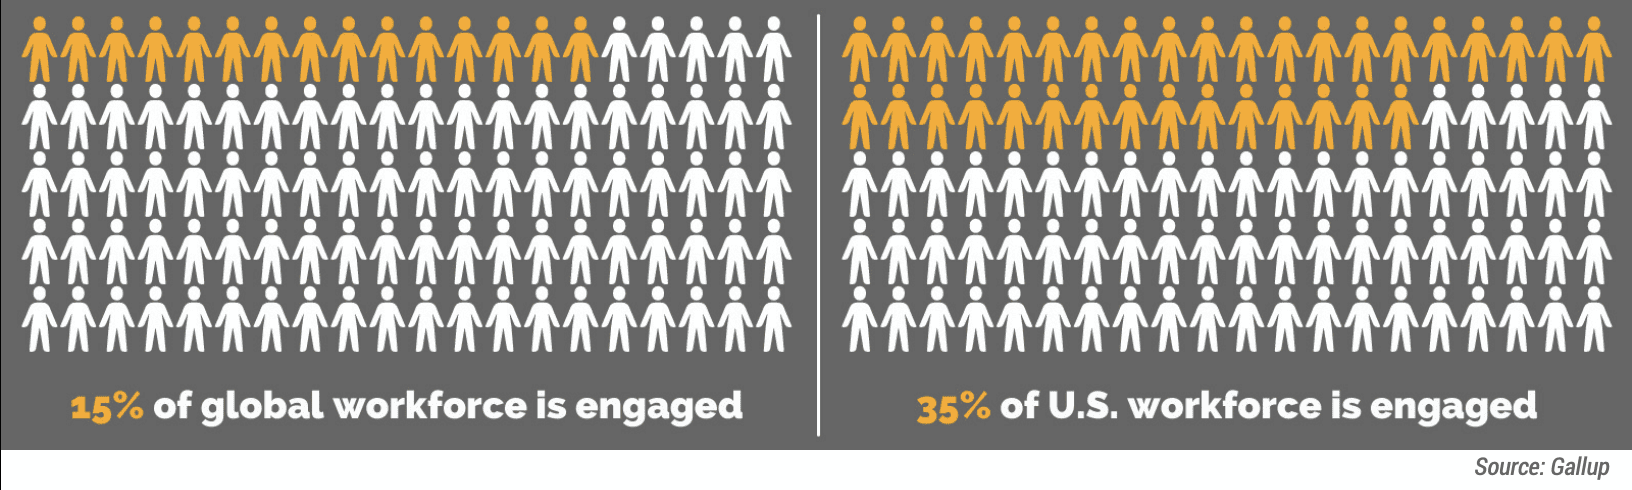 Gallup state of workforce engagement graphic